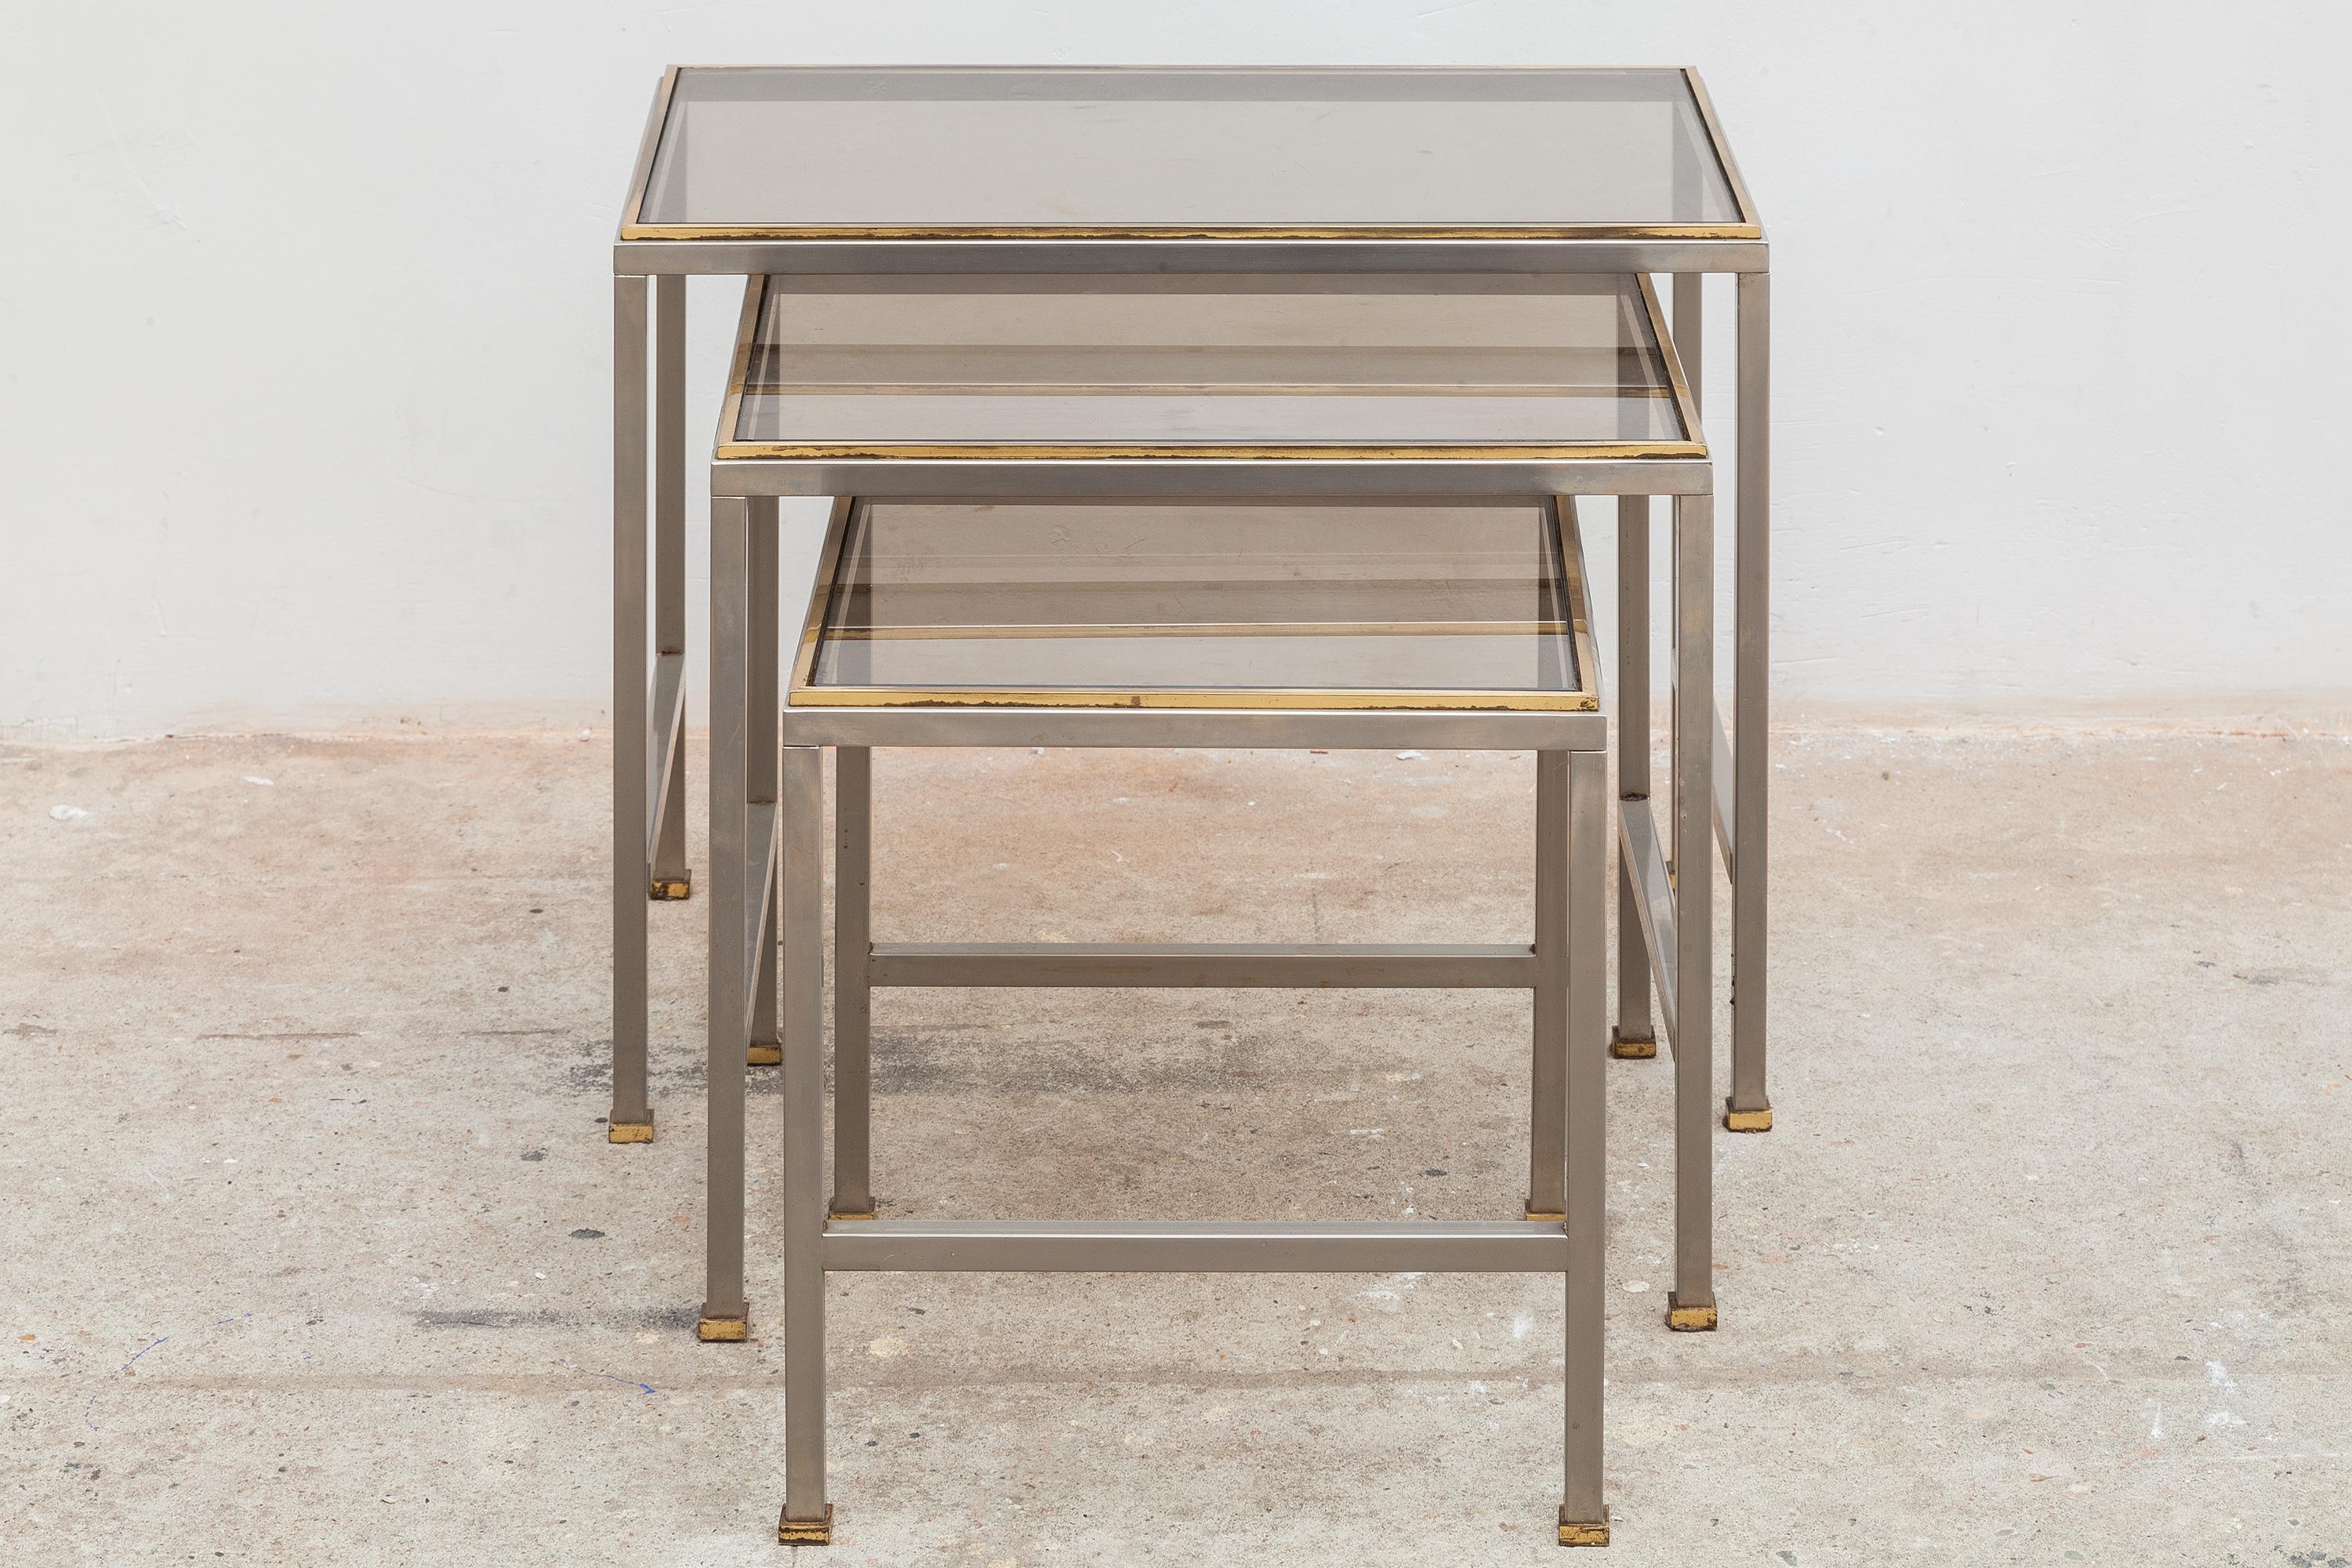 Vintage mid-century nesting tables. Modernist silver and brass tone frames with smoked glass tops.Dimensions:Small:32W x 34H x 32D cm Med: 42W x 38H x 32D cm Large: 52W x 42H x 32D cm.